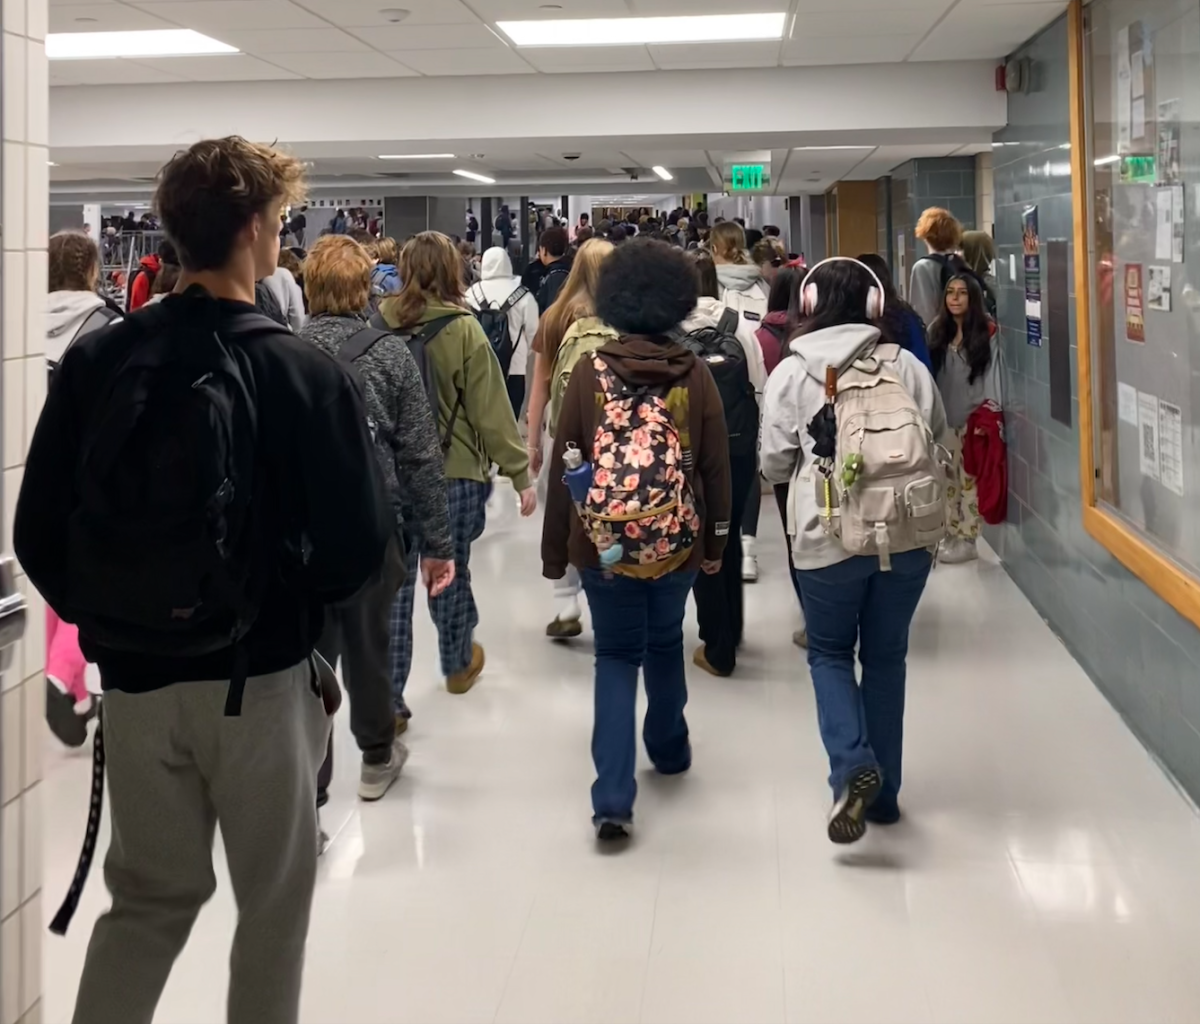 Recent Incidents Involving Guns Leave Students Feeling Unsettled